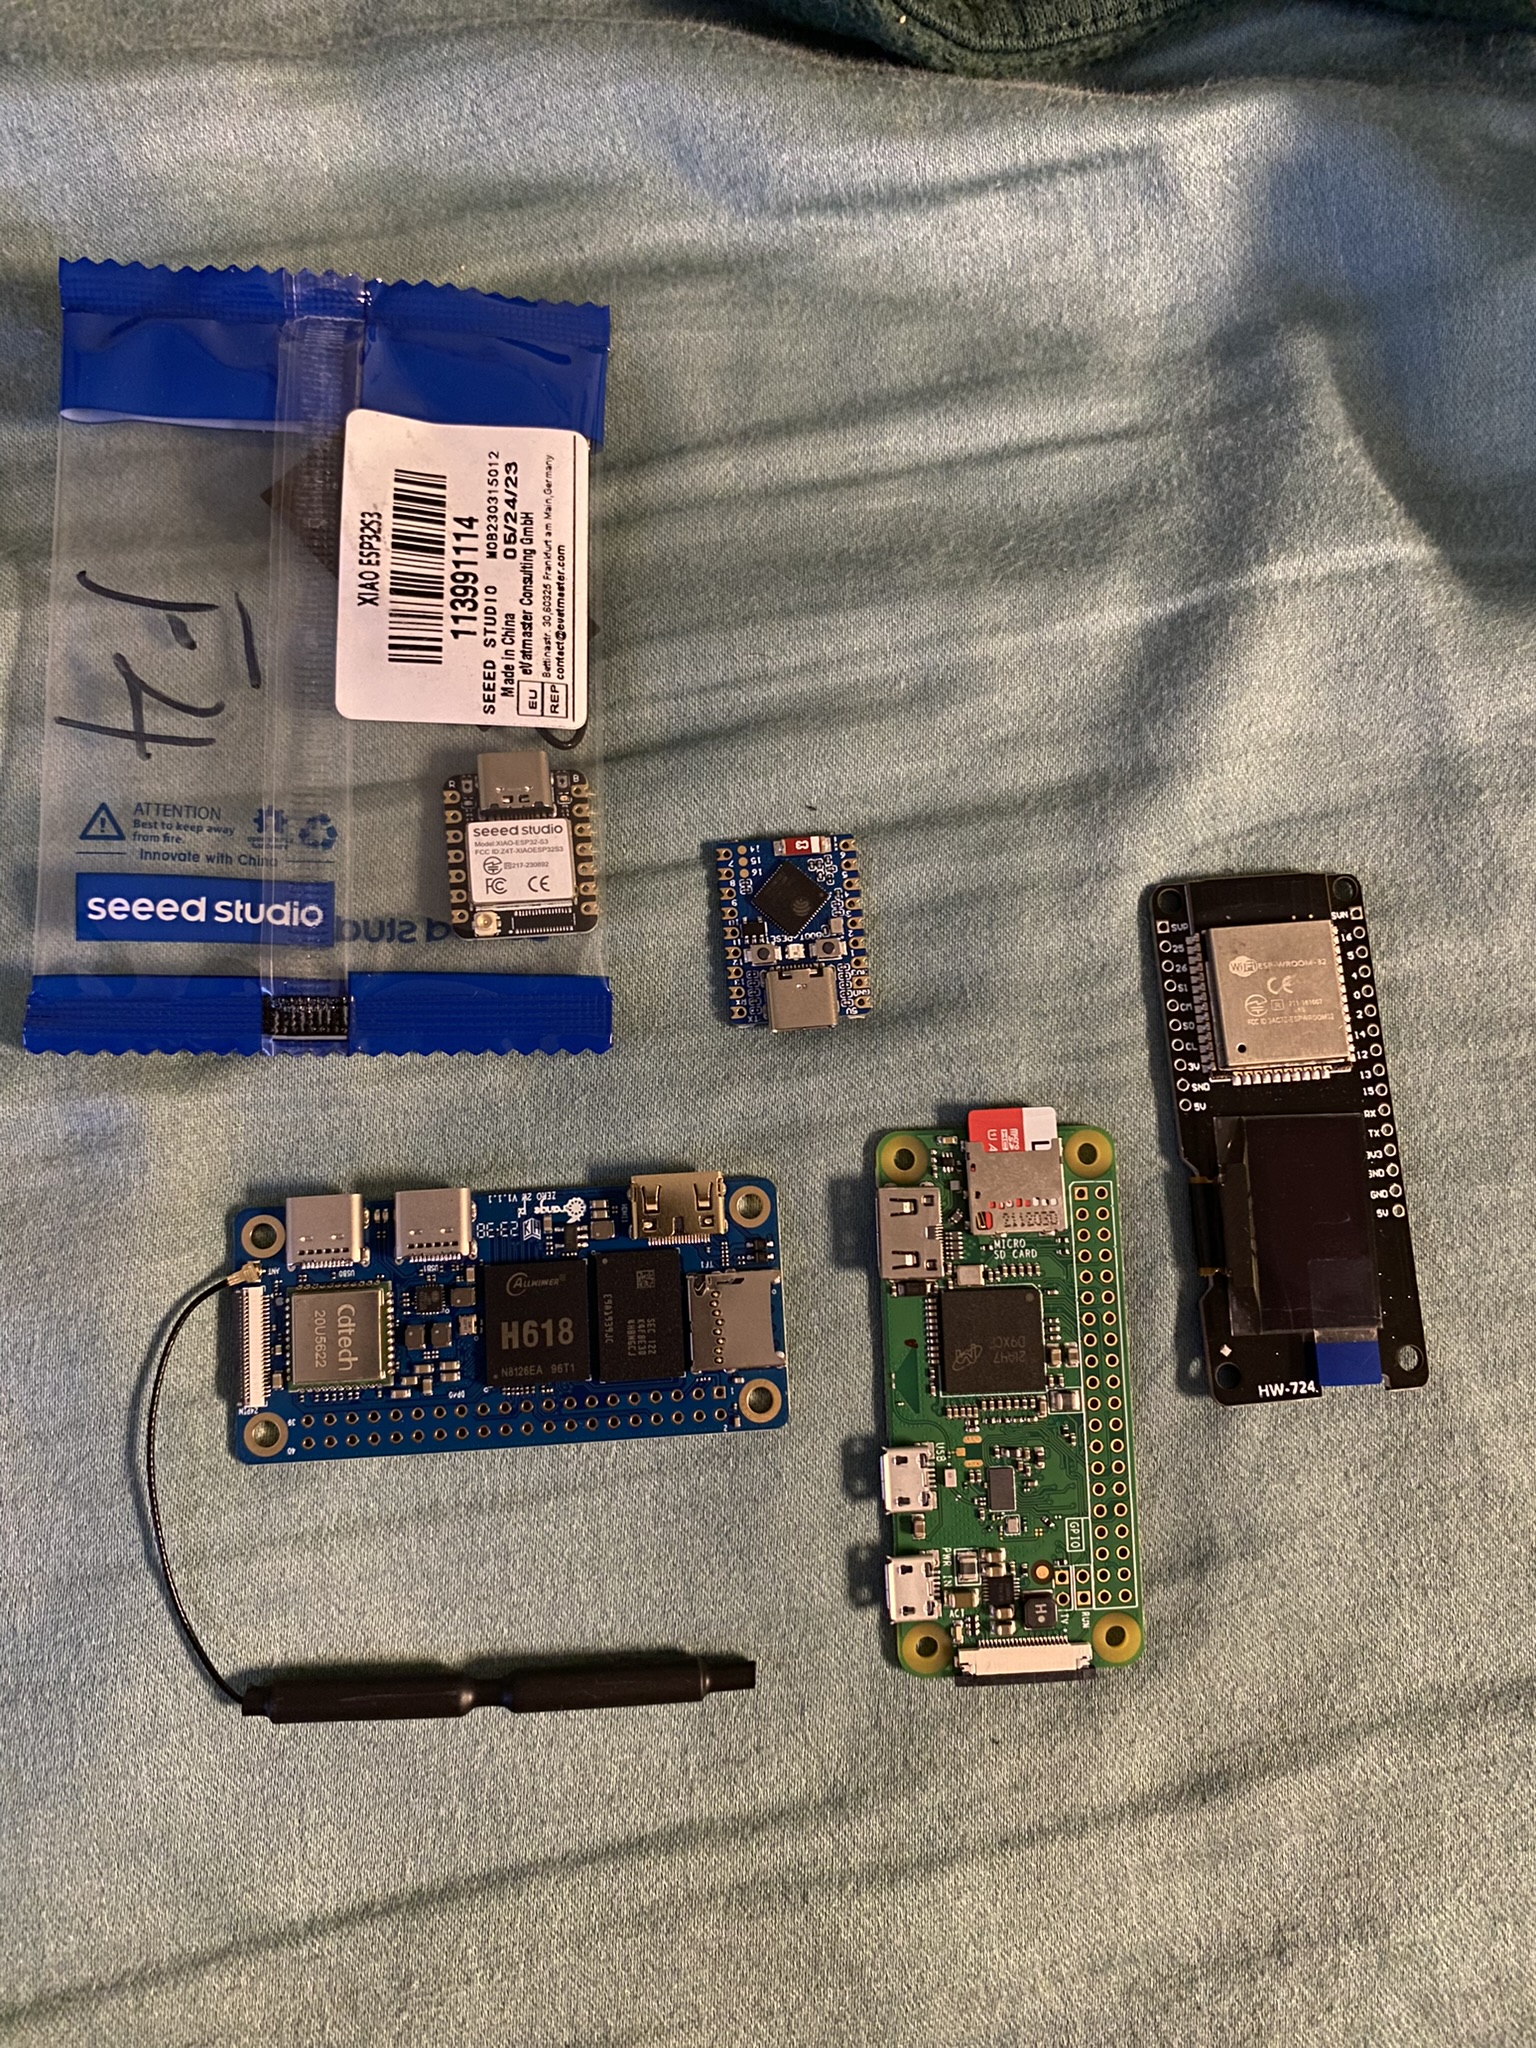 A picture showing several devices I've purchased over the course of this project